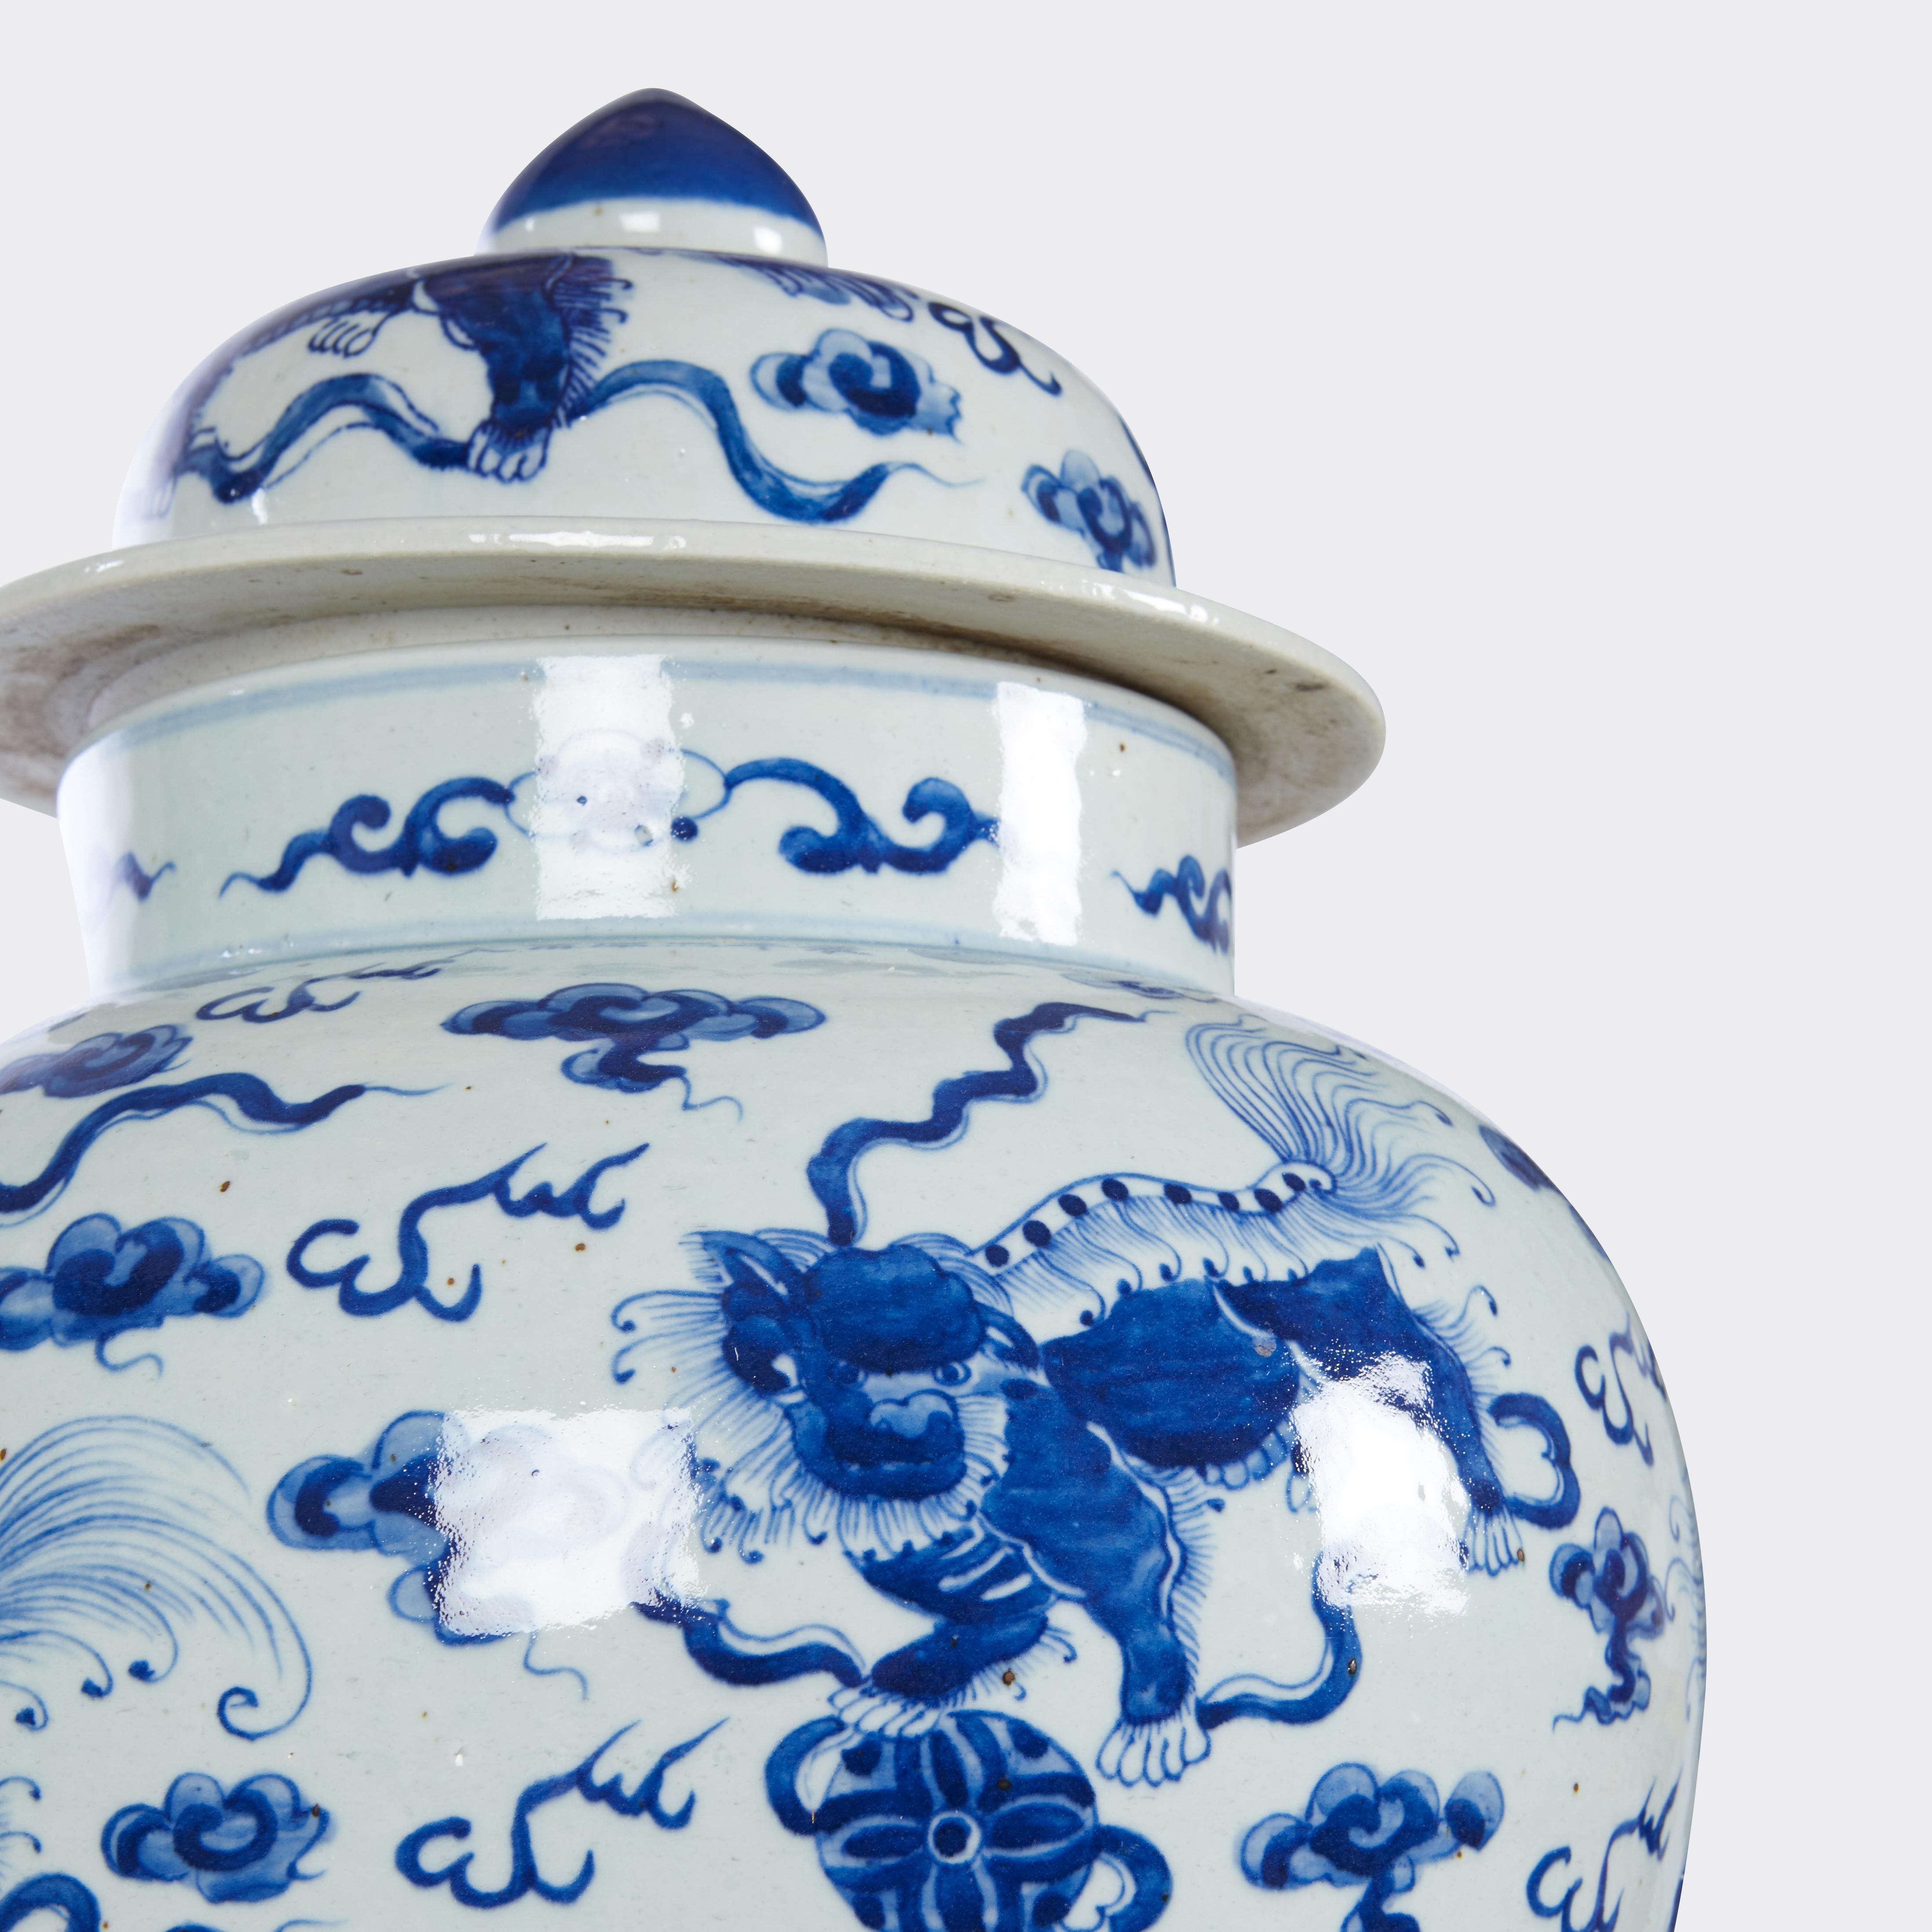 Pair of blue and white vases with covers, bodies and lids decorated with fu-dogs and stylized cloud motifs. Circa 1970s.